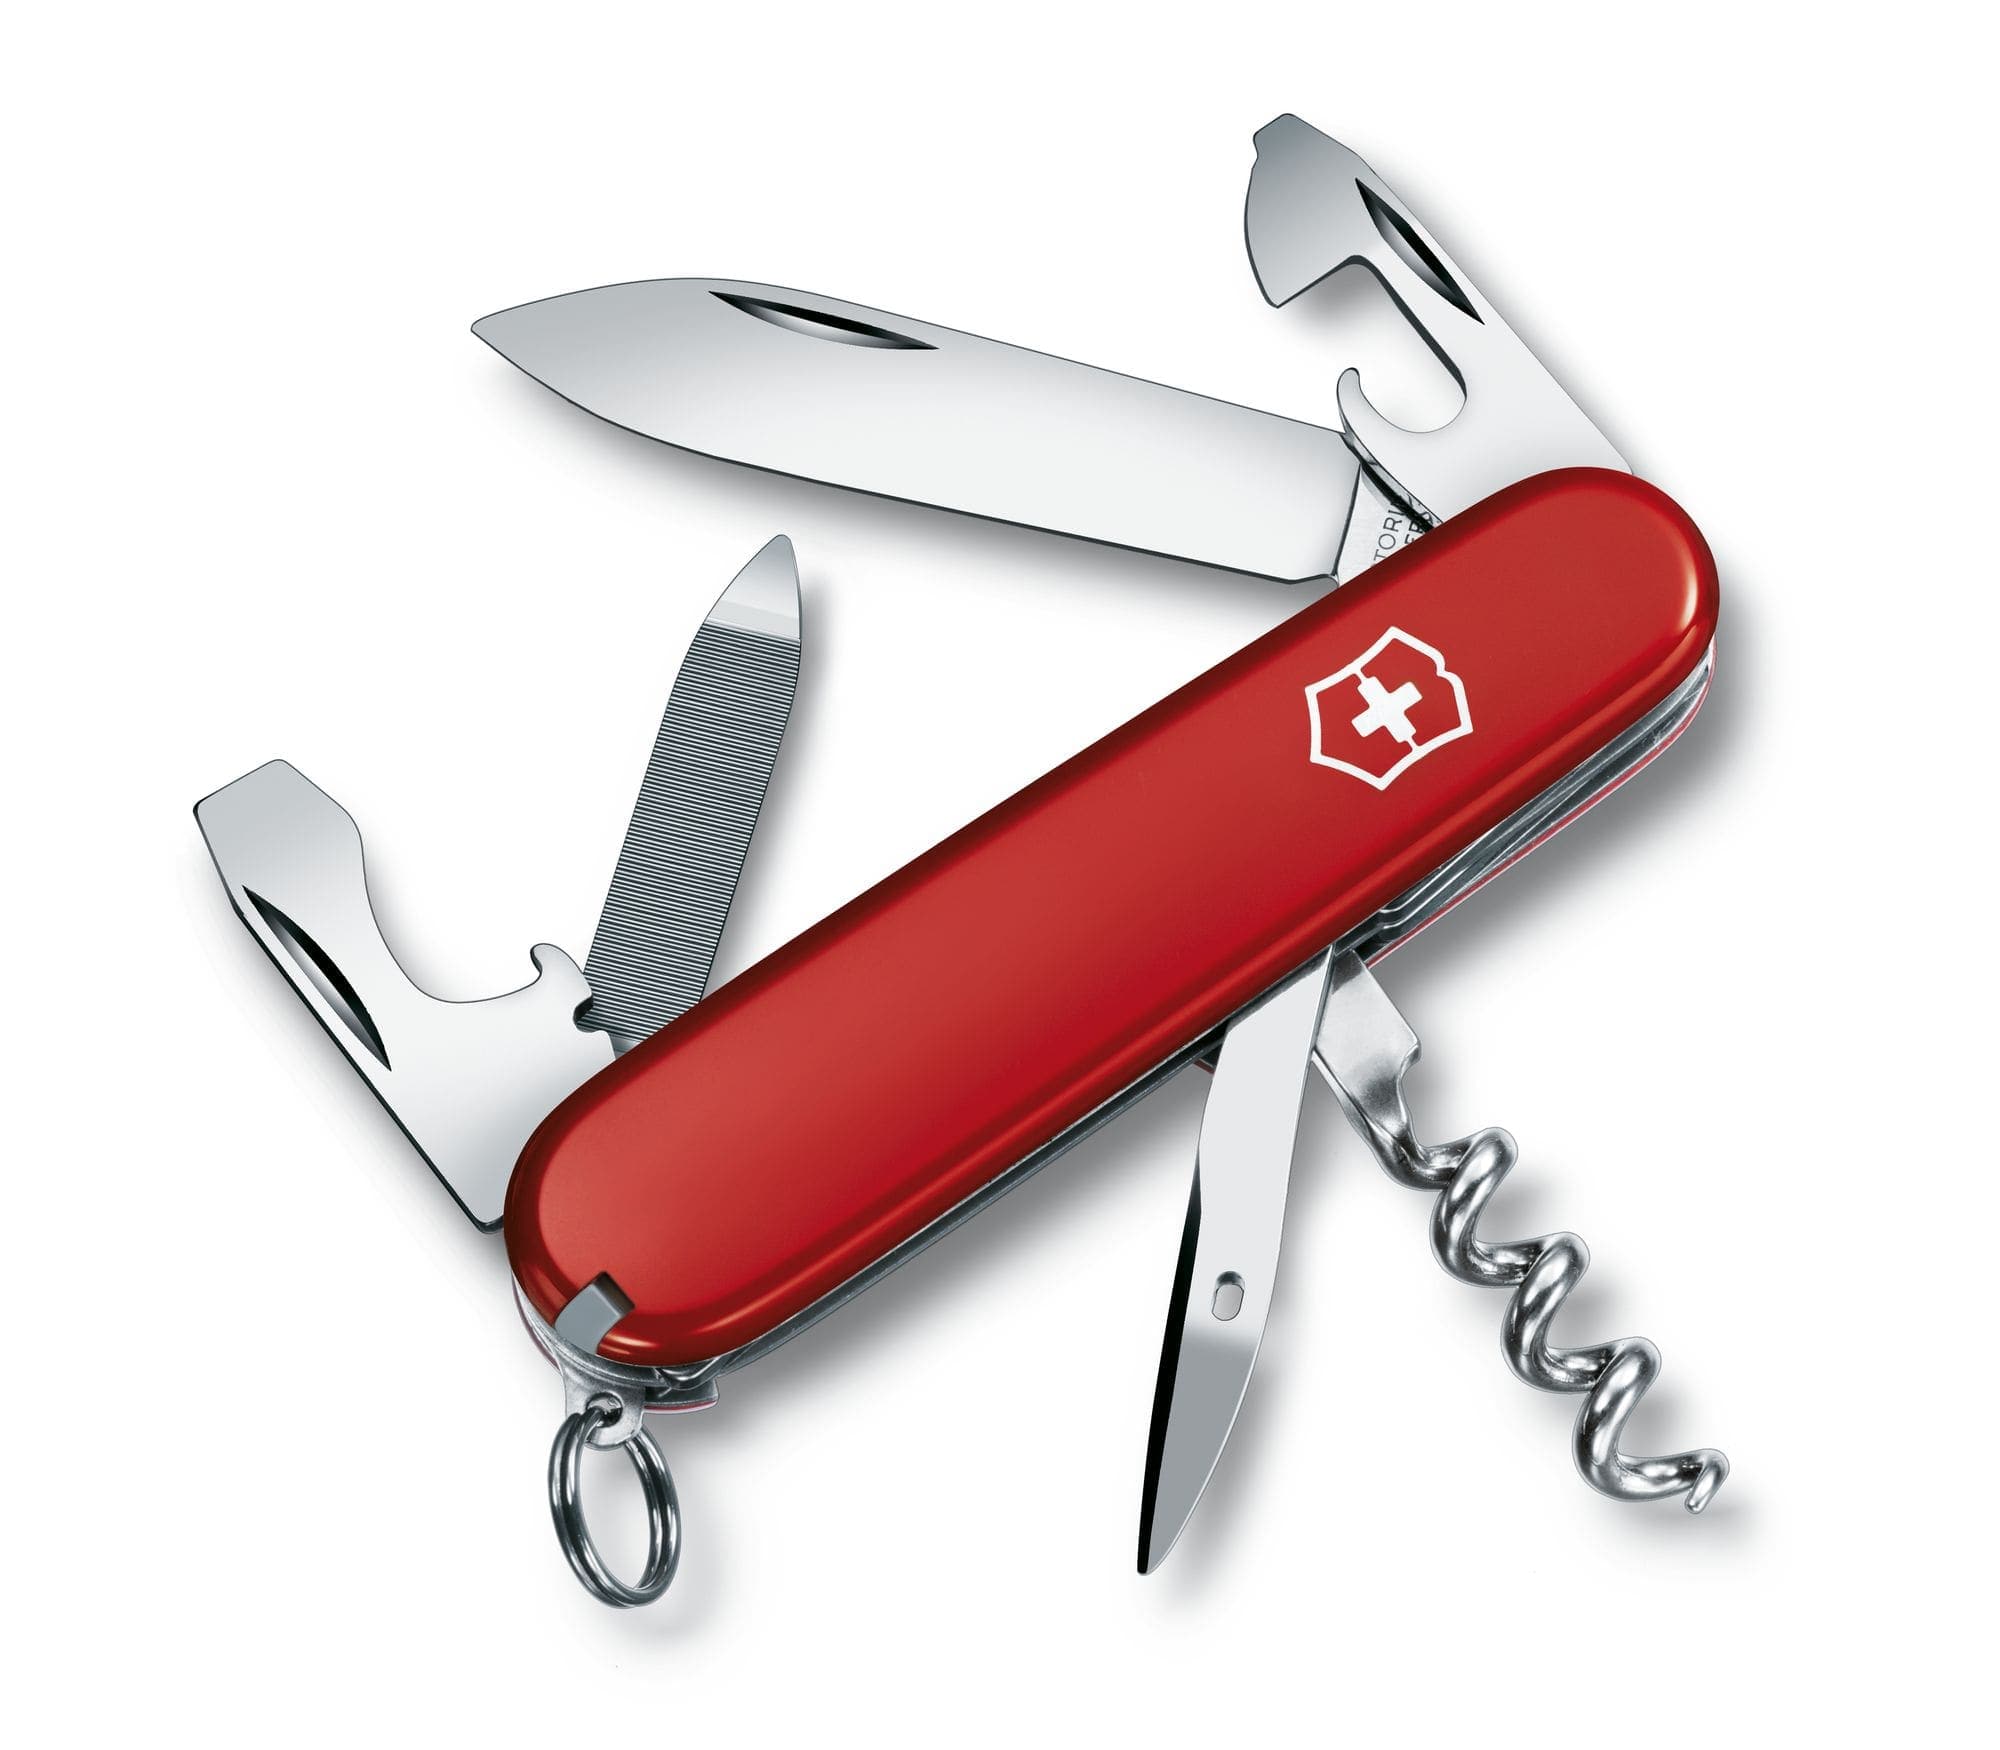 VICTORINOX SWISS ARMY KNIFE OFFICERS KNIFE SPORTSMAN WITH 13 FUNCTIONS - 0.3803.B1